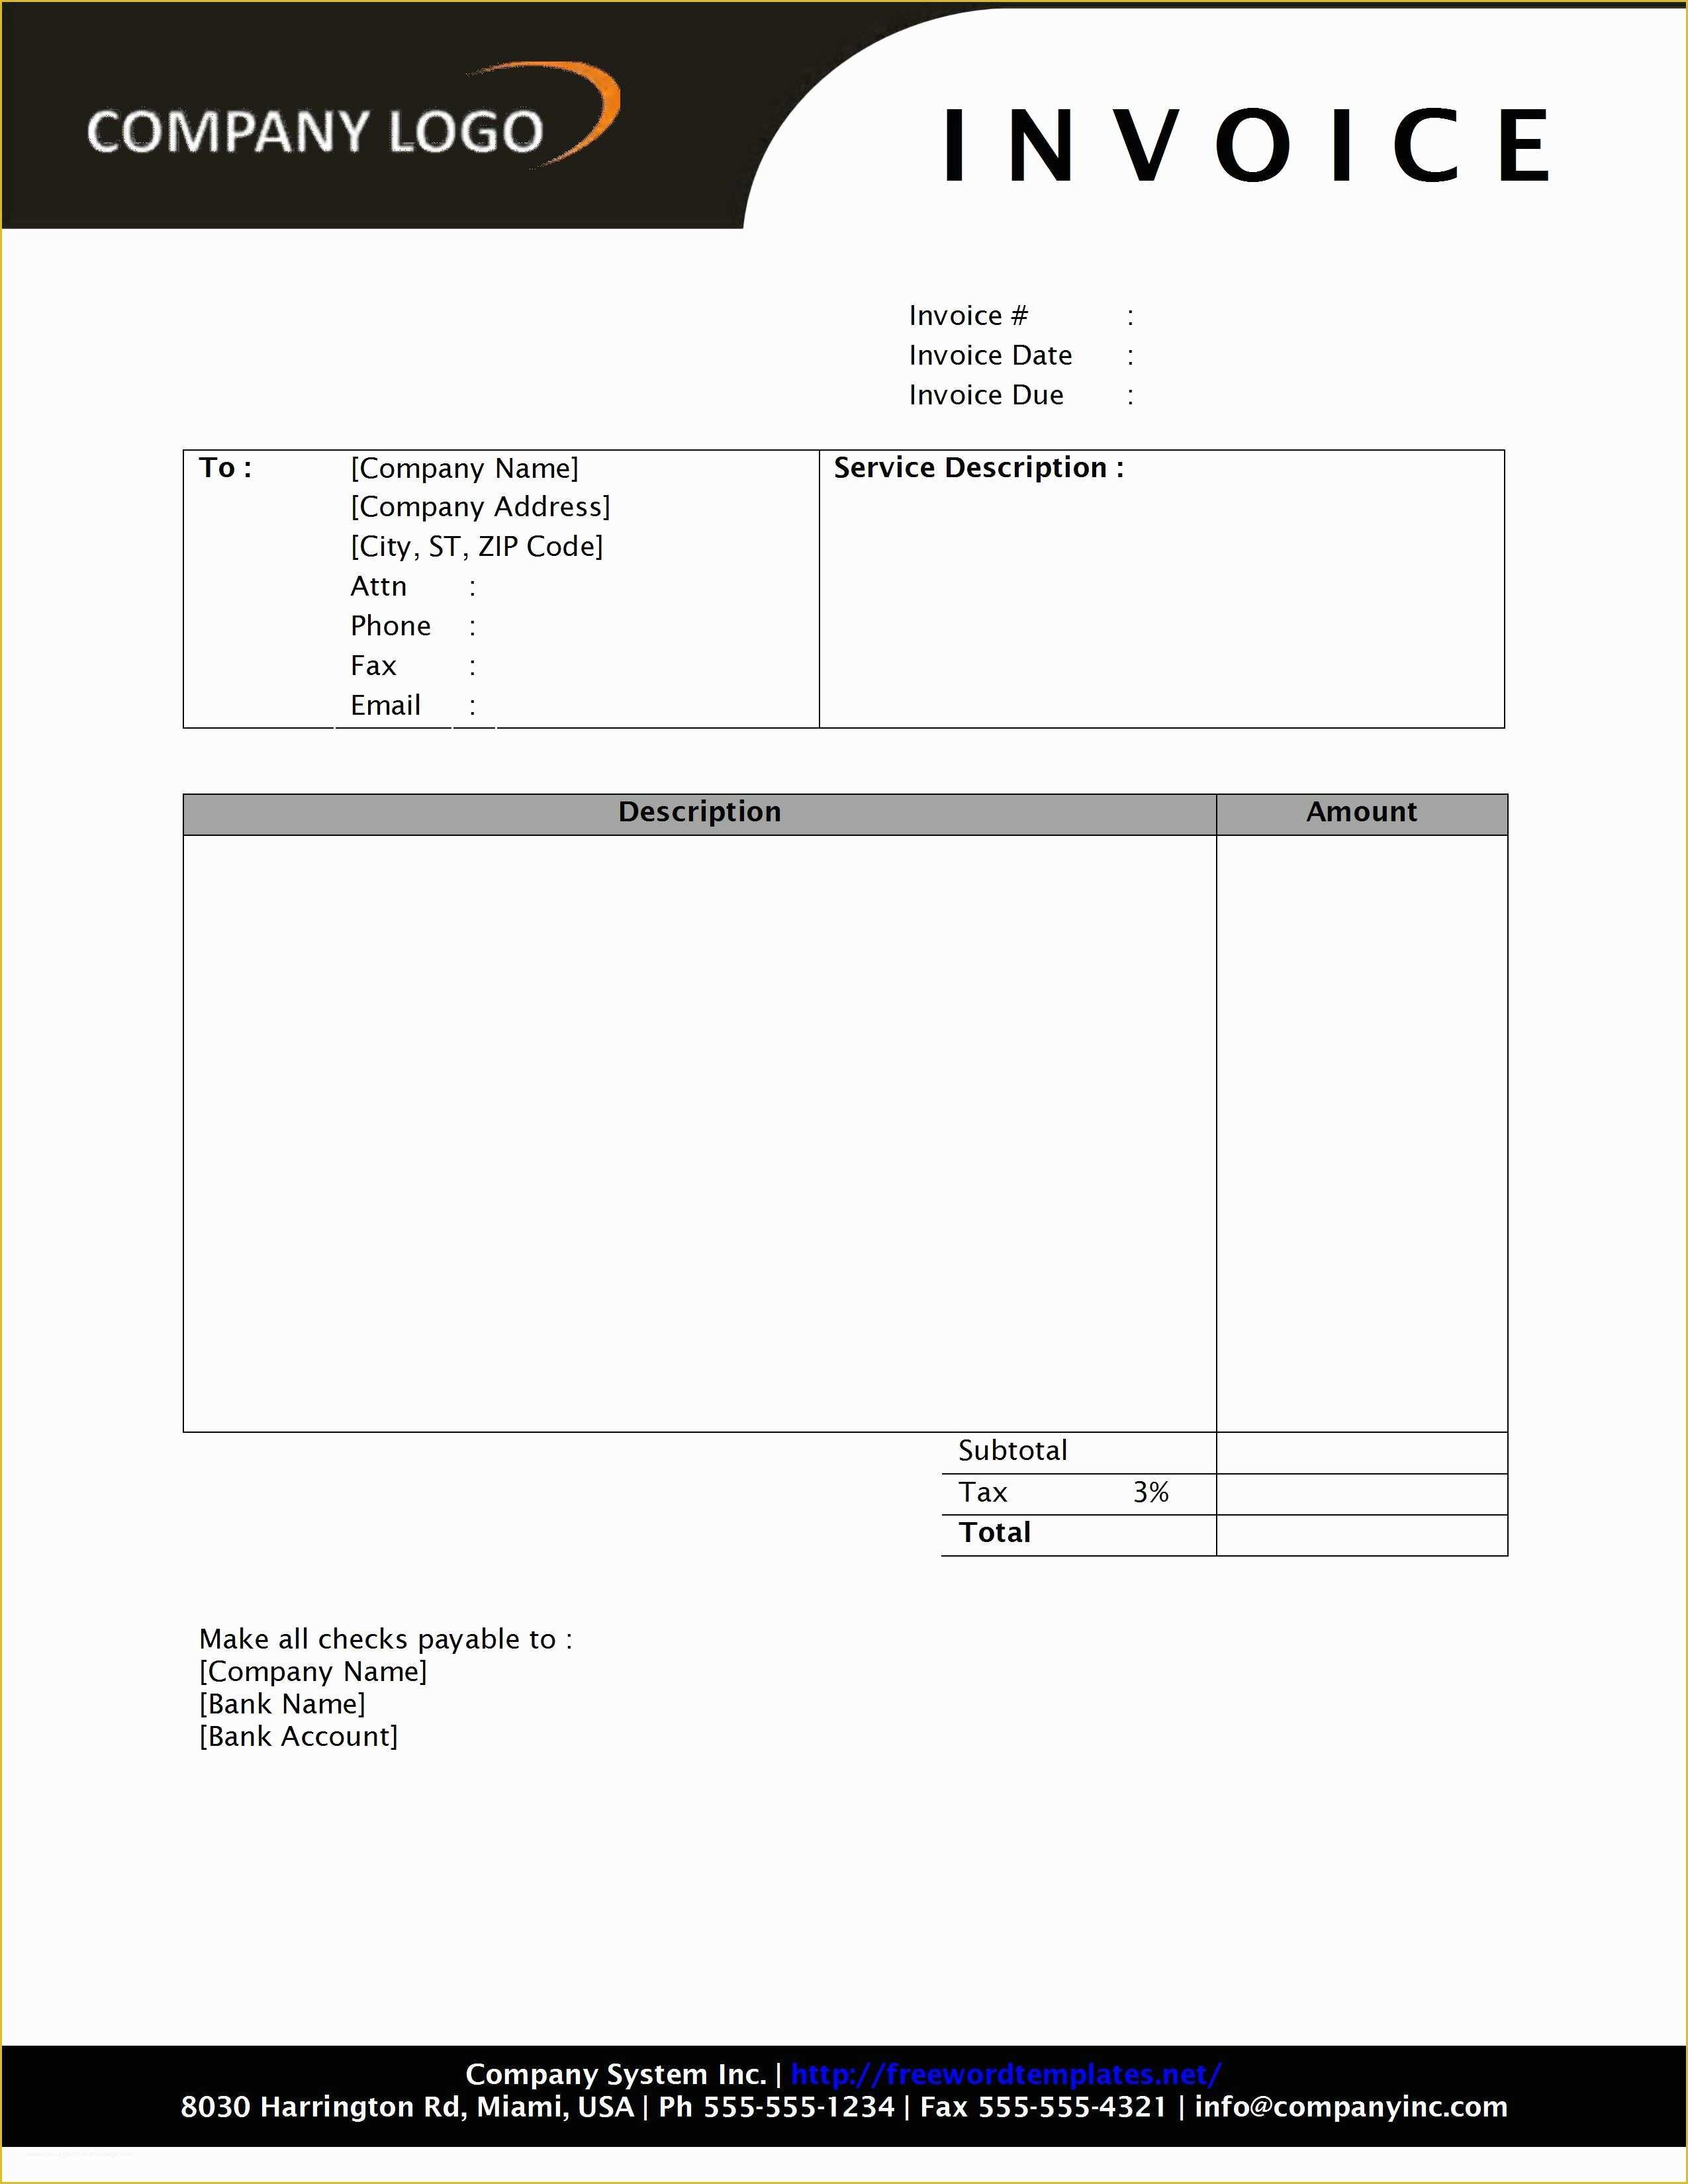 Basic Invoice Template Free Of Invoice Template Word 2010